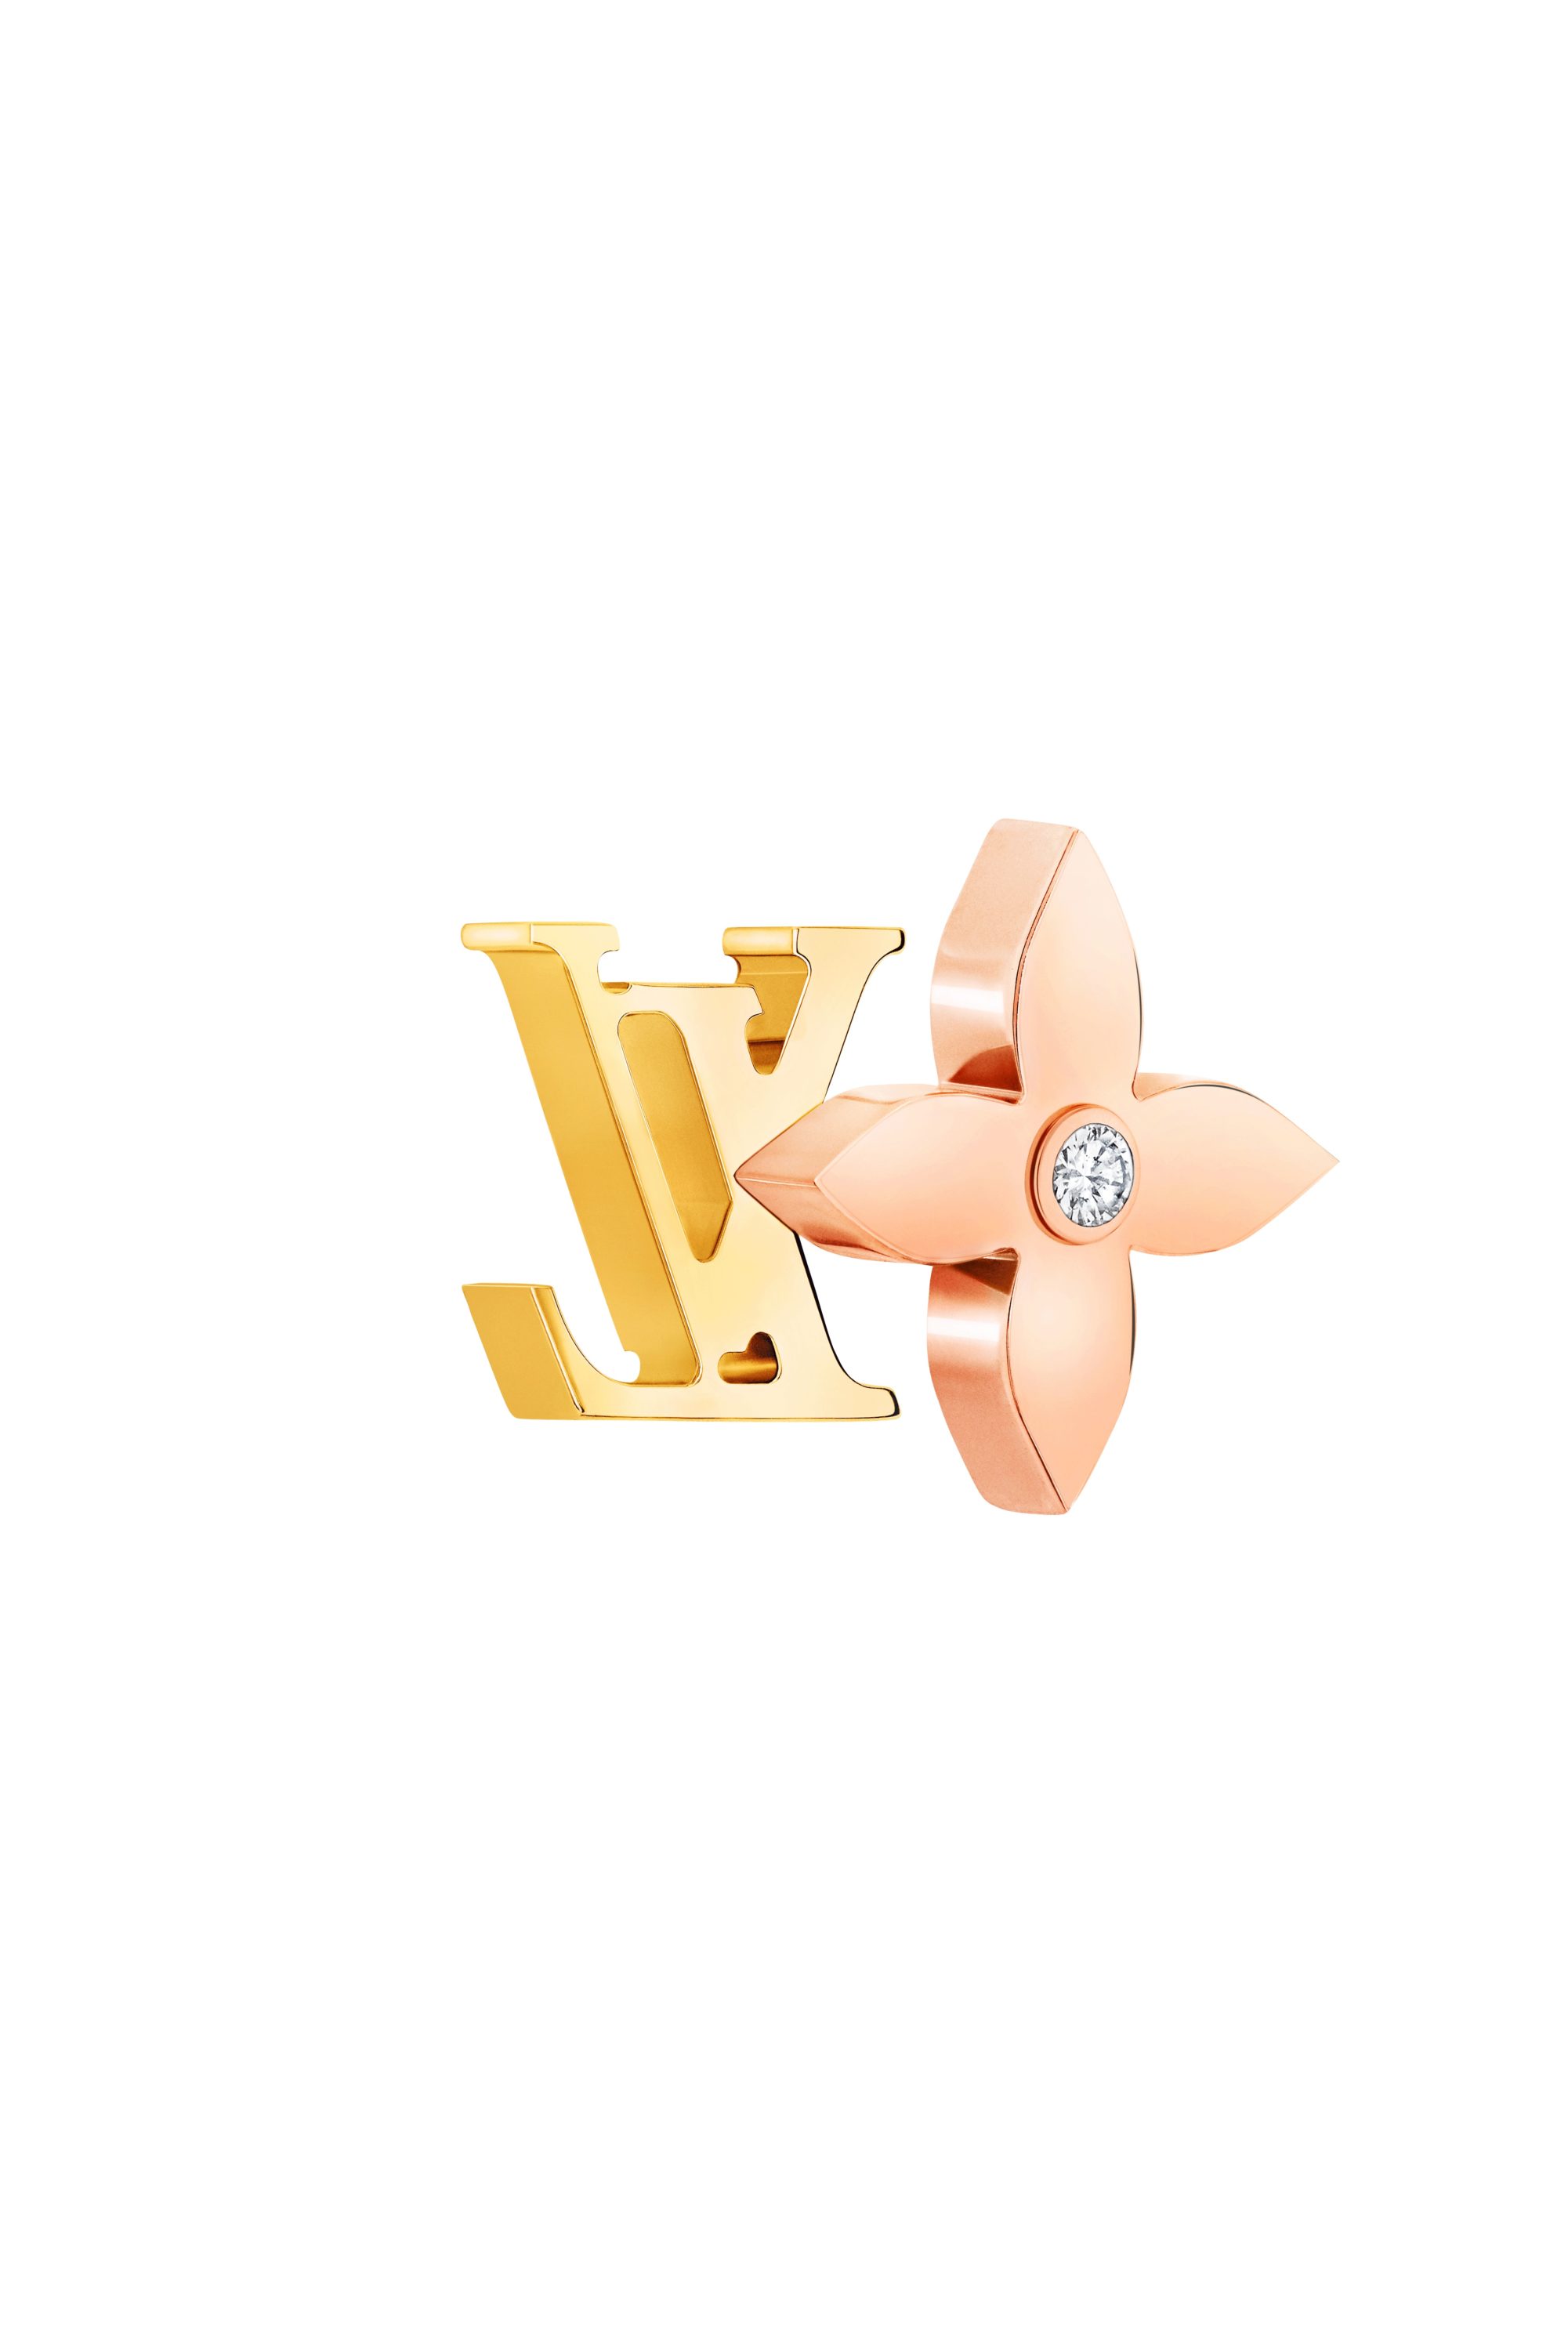 Idylle Blossom Reversible Stud, Yellow And White Gold And Diamond